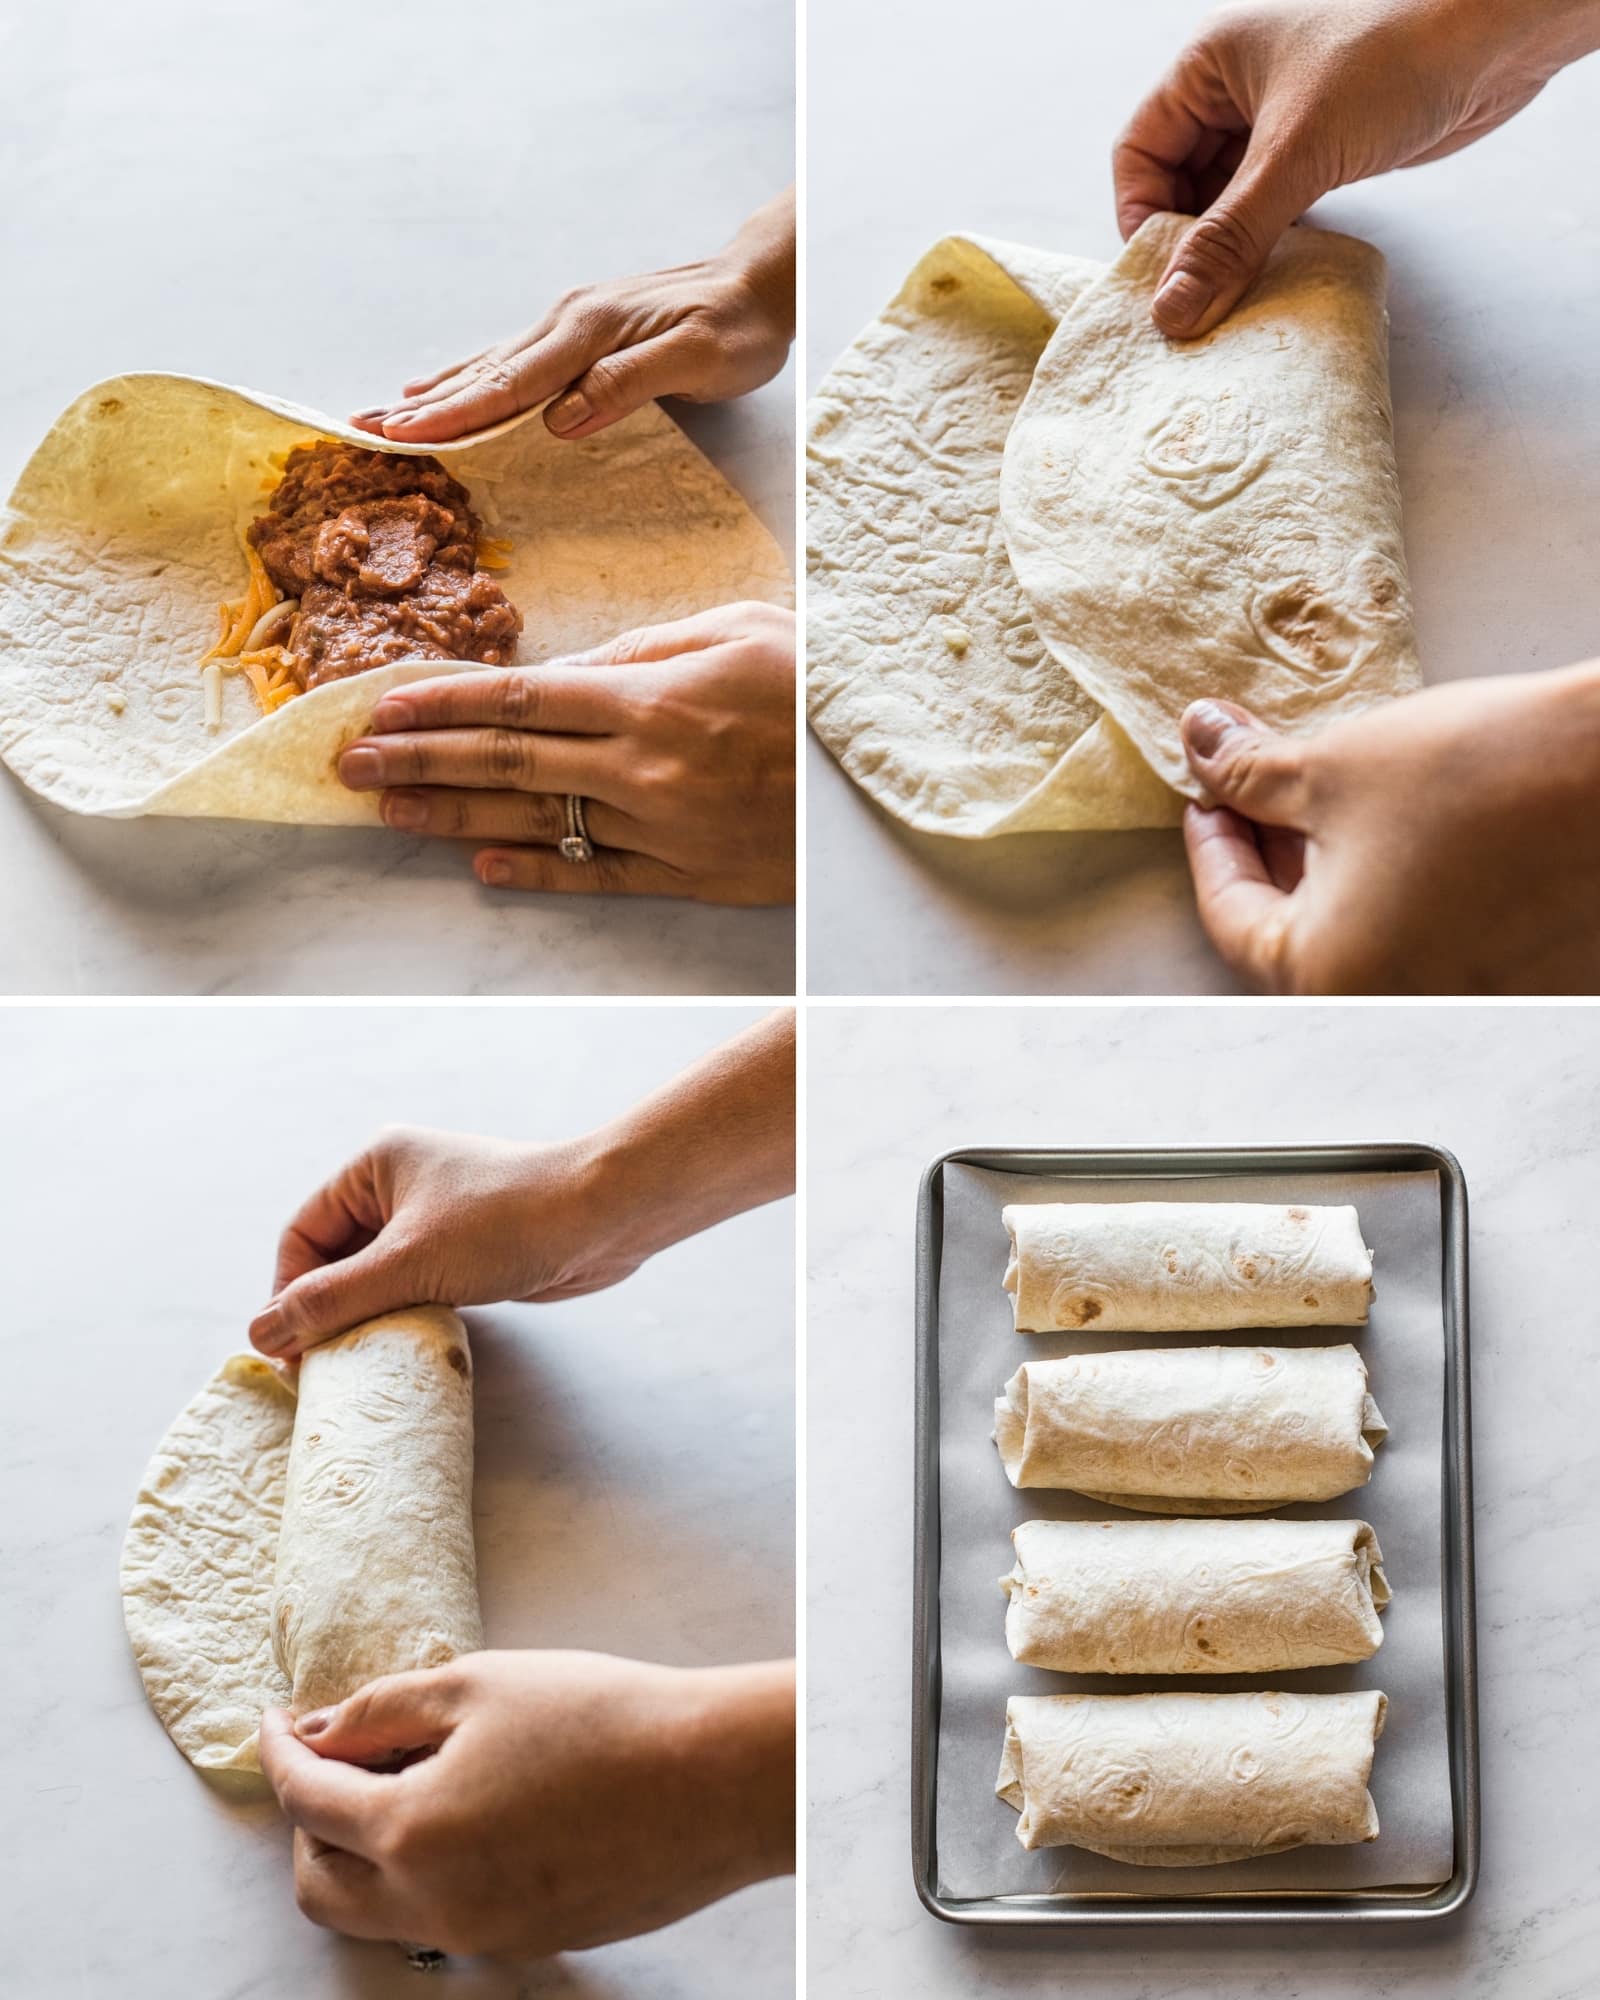 Step by step photos of how to roll a burrito.